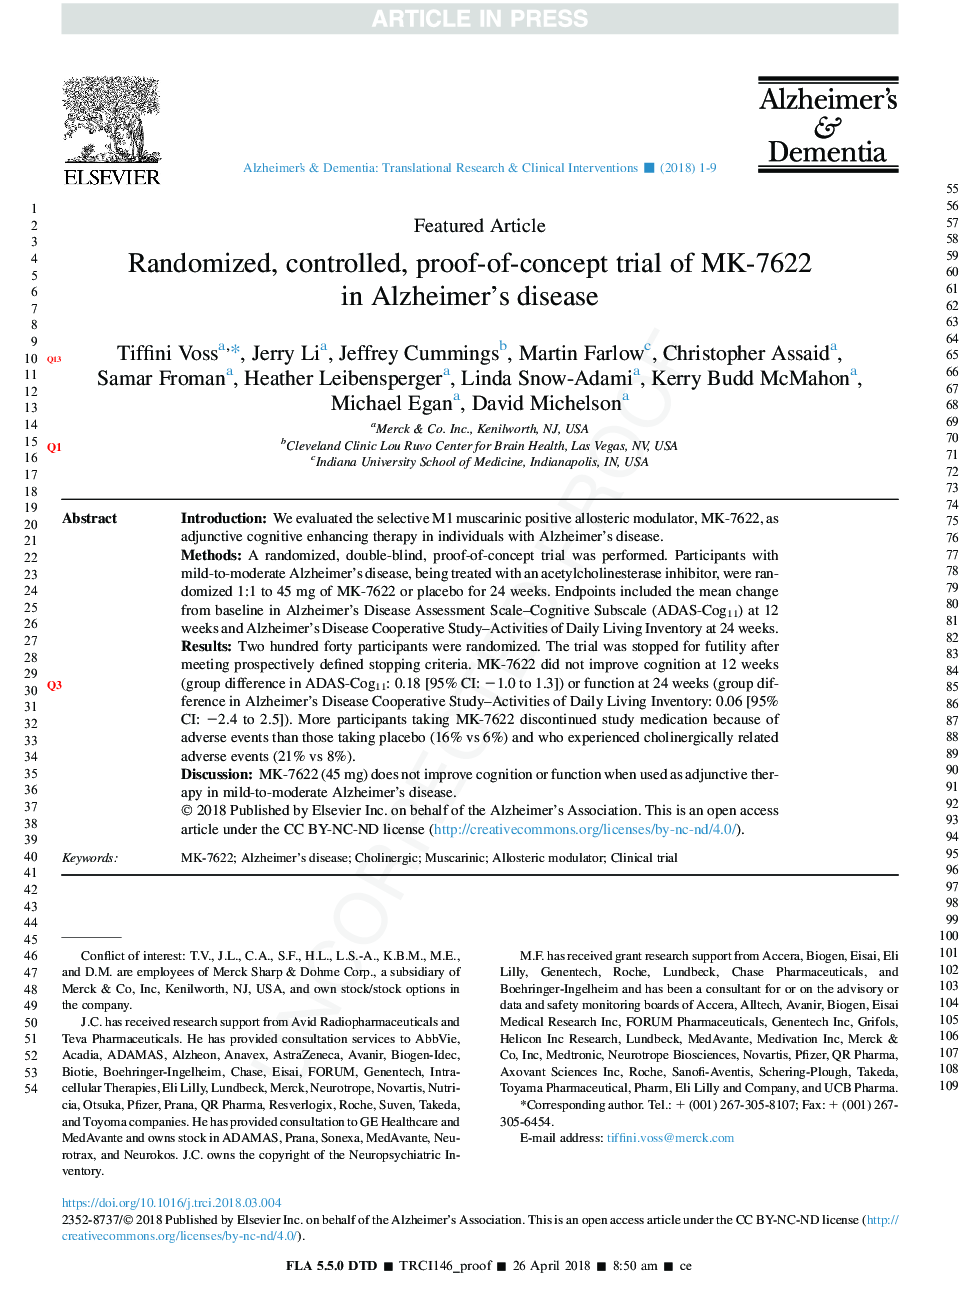 Randomized, controlled, proof-of-concept trial of MK-7622 in Alzheimer's disease